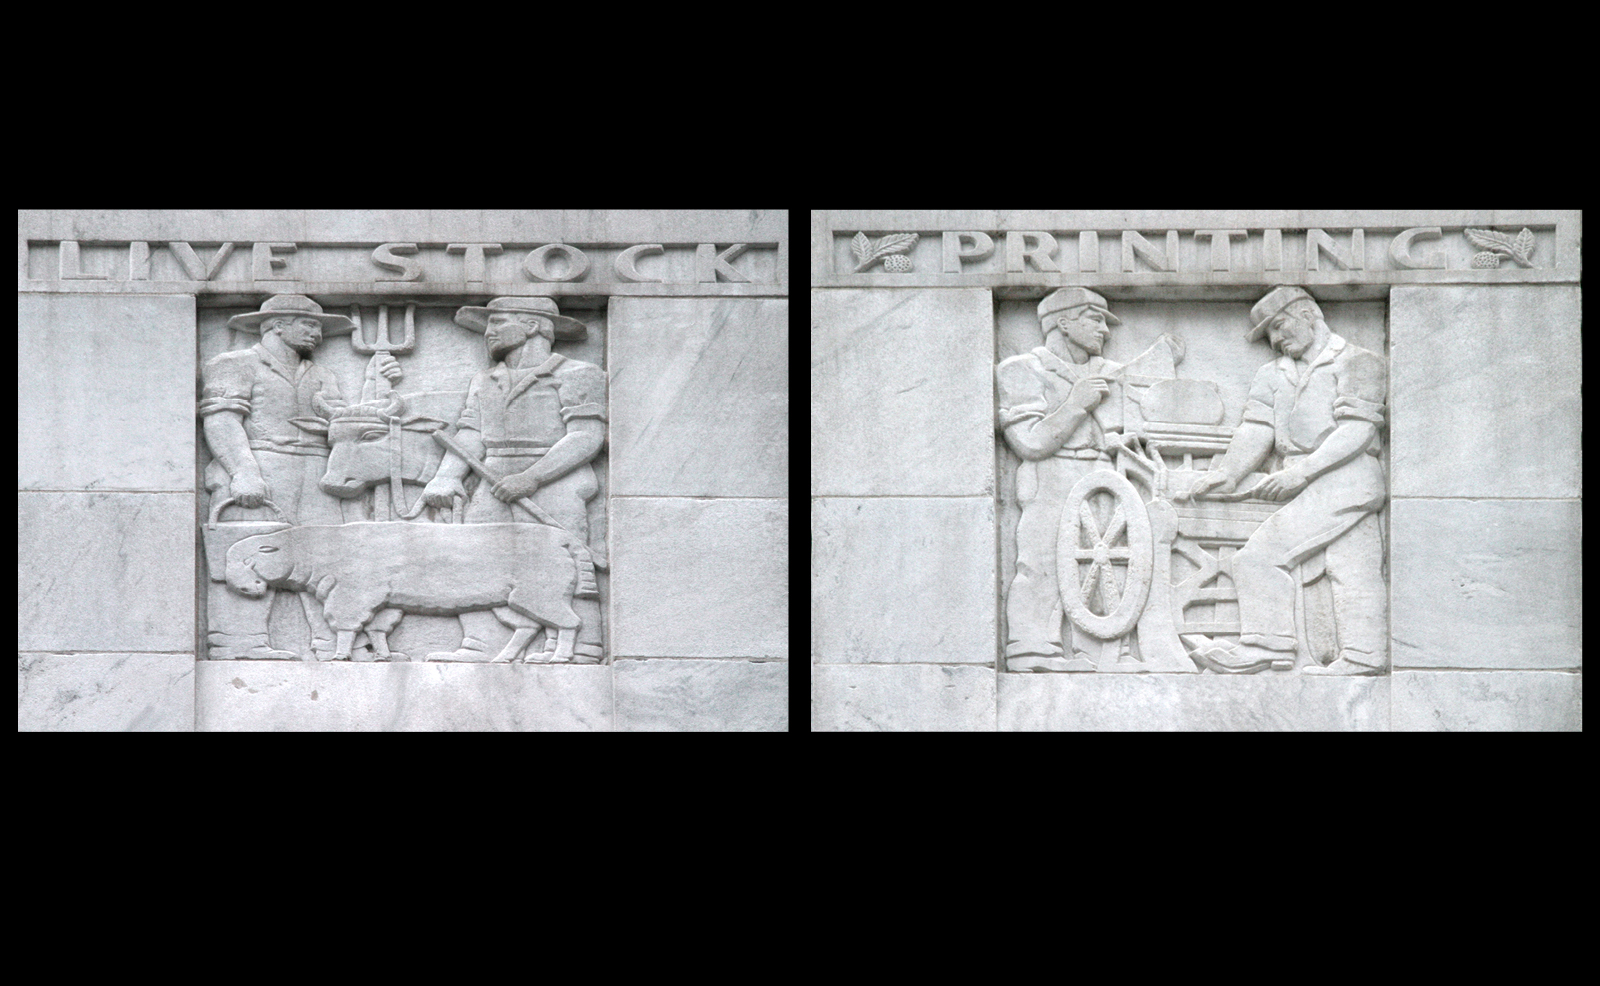 Image of two carvings: the first is of two men wearing wide-brimmed hats - one carrying a pitchfork and bucket - another holding a cow on a lede. In front of them stands a sheep. Above are the words 'Live Stock'; the second is of two men wearing caps working at a printing press. Above is the word 'Printing'